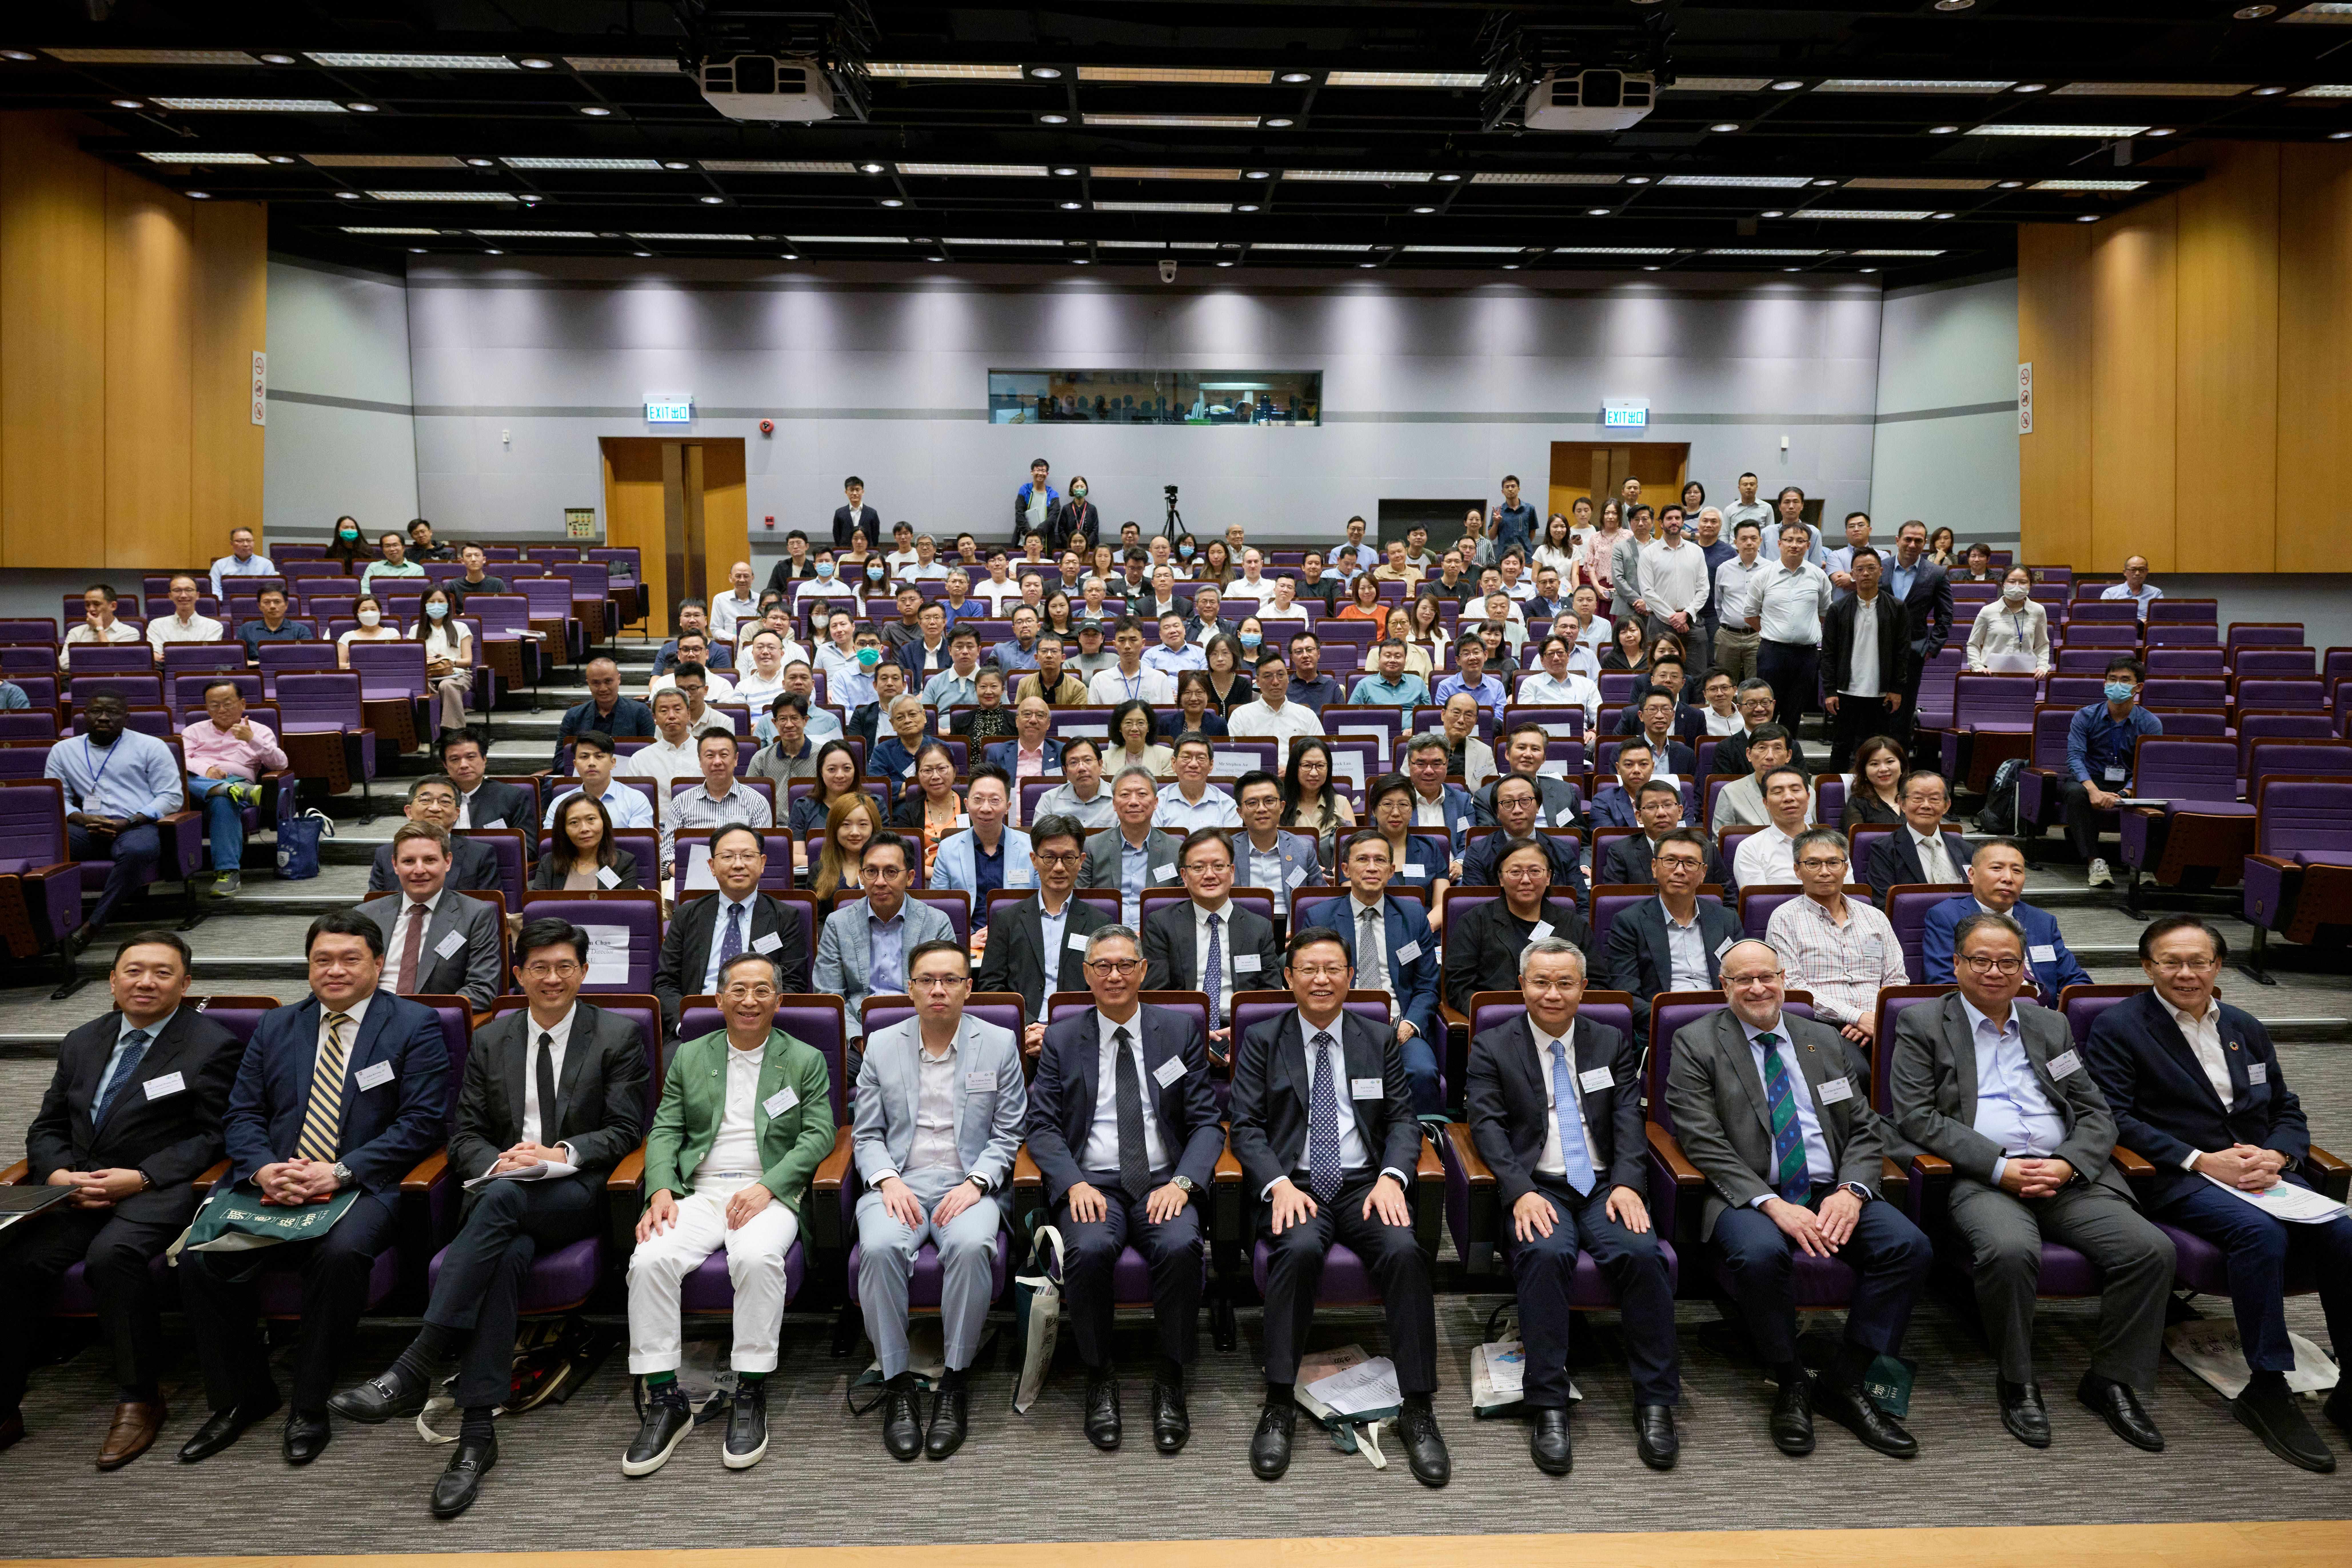 The Centre for Innovation in Construction and Infrastructure Development (CICID) and the MiC Laboratory (MiCLab) of the Department of Civil Engineering, The University of Hong Kong (HKU) held a Strategic Public Policy Forum titled 